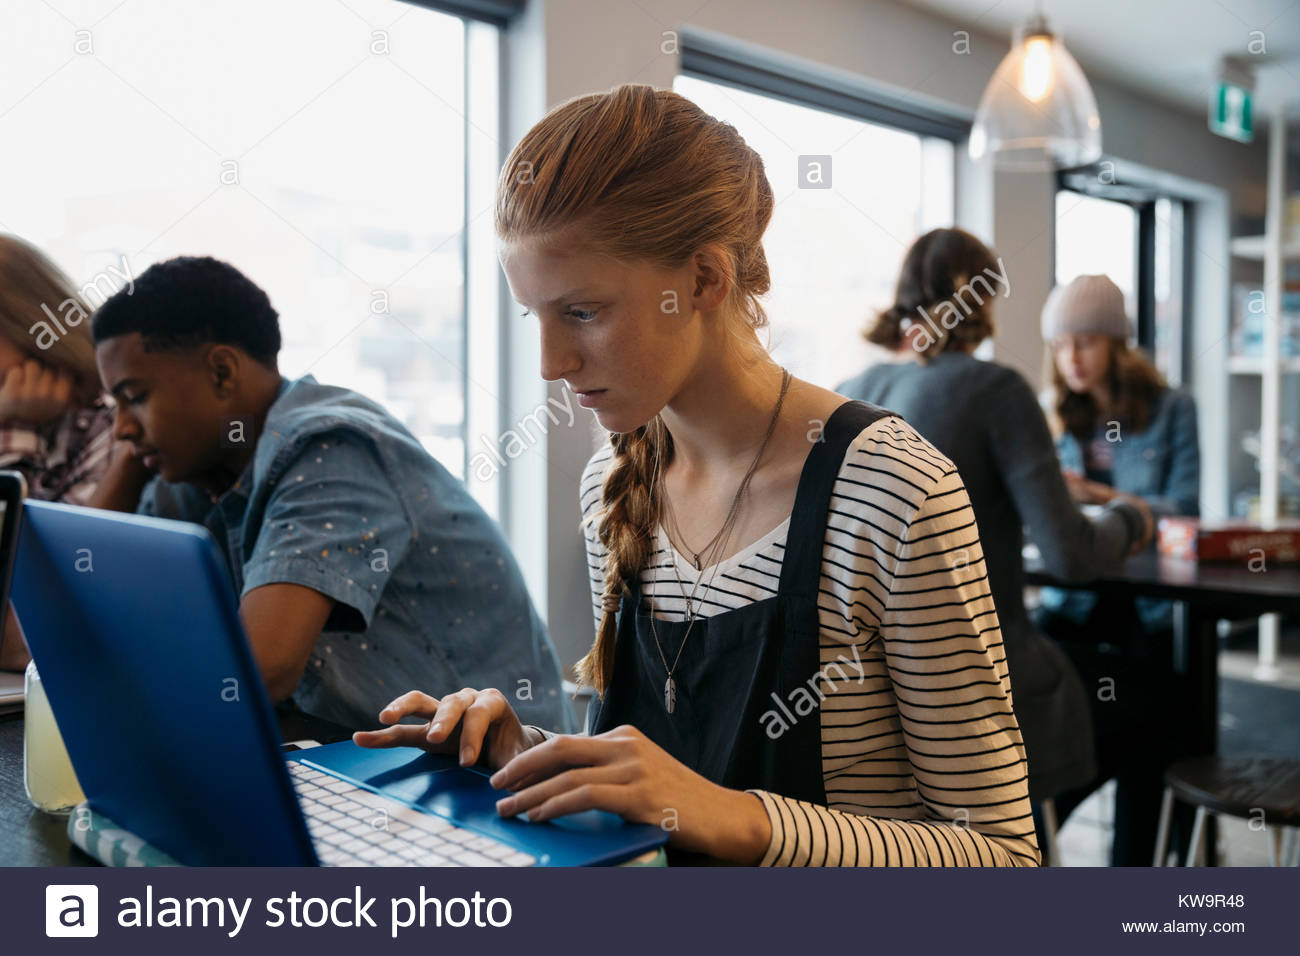 High school girl student laptop in cafe Banque D'Images